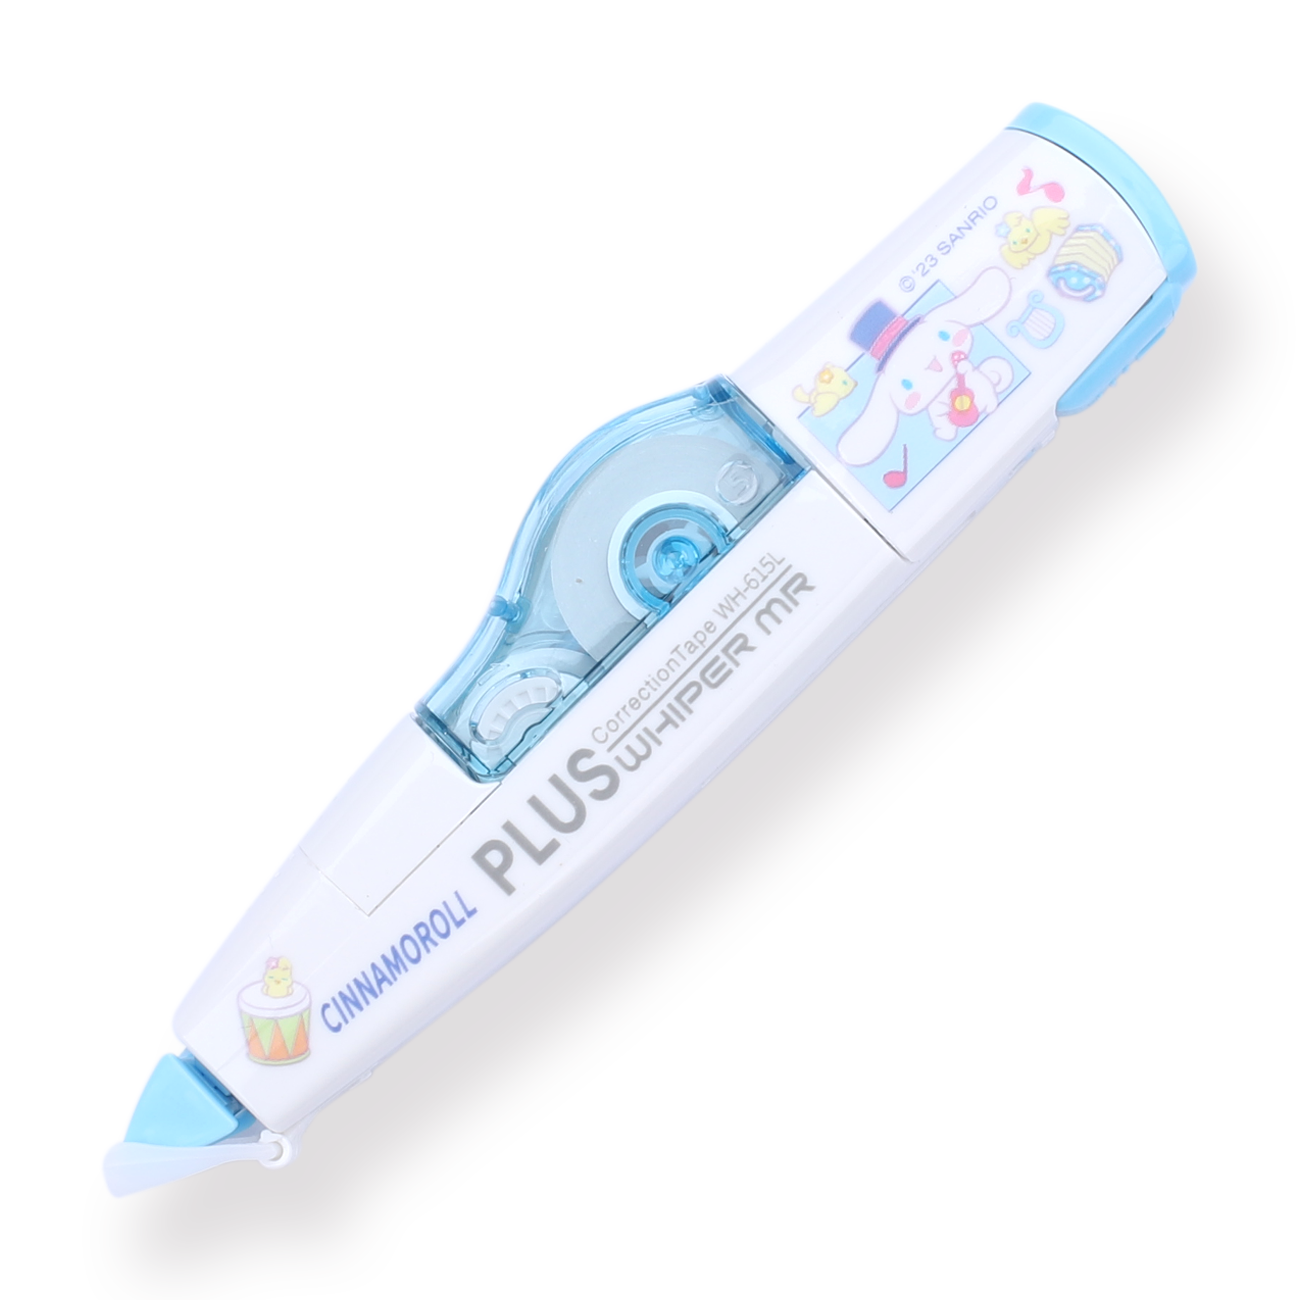 Plus Whiper MR Limited Edition Correction Tape - Cinnamoroll - White - Stationery Pal